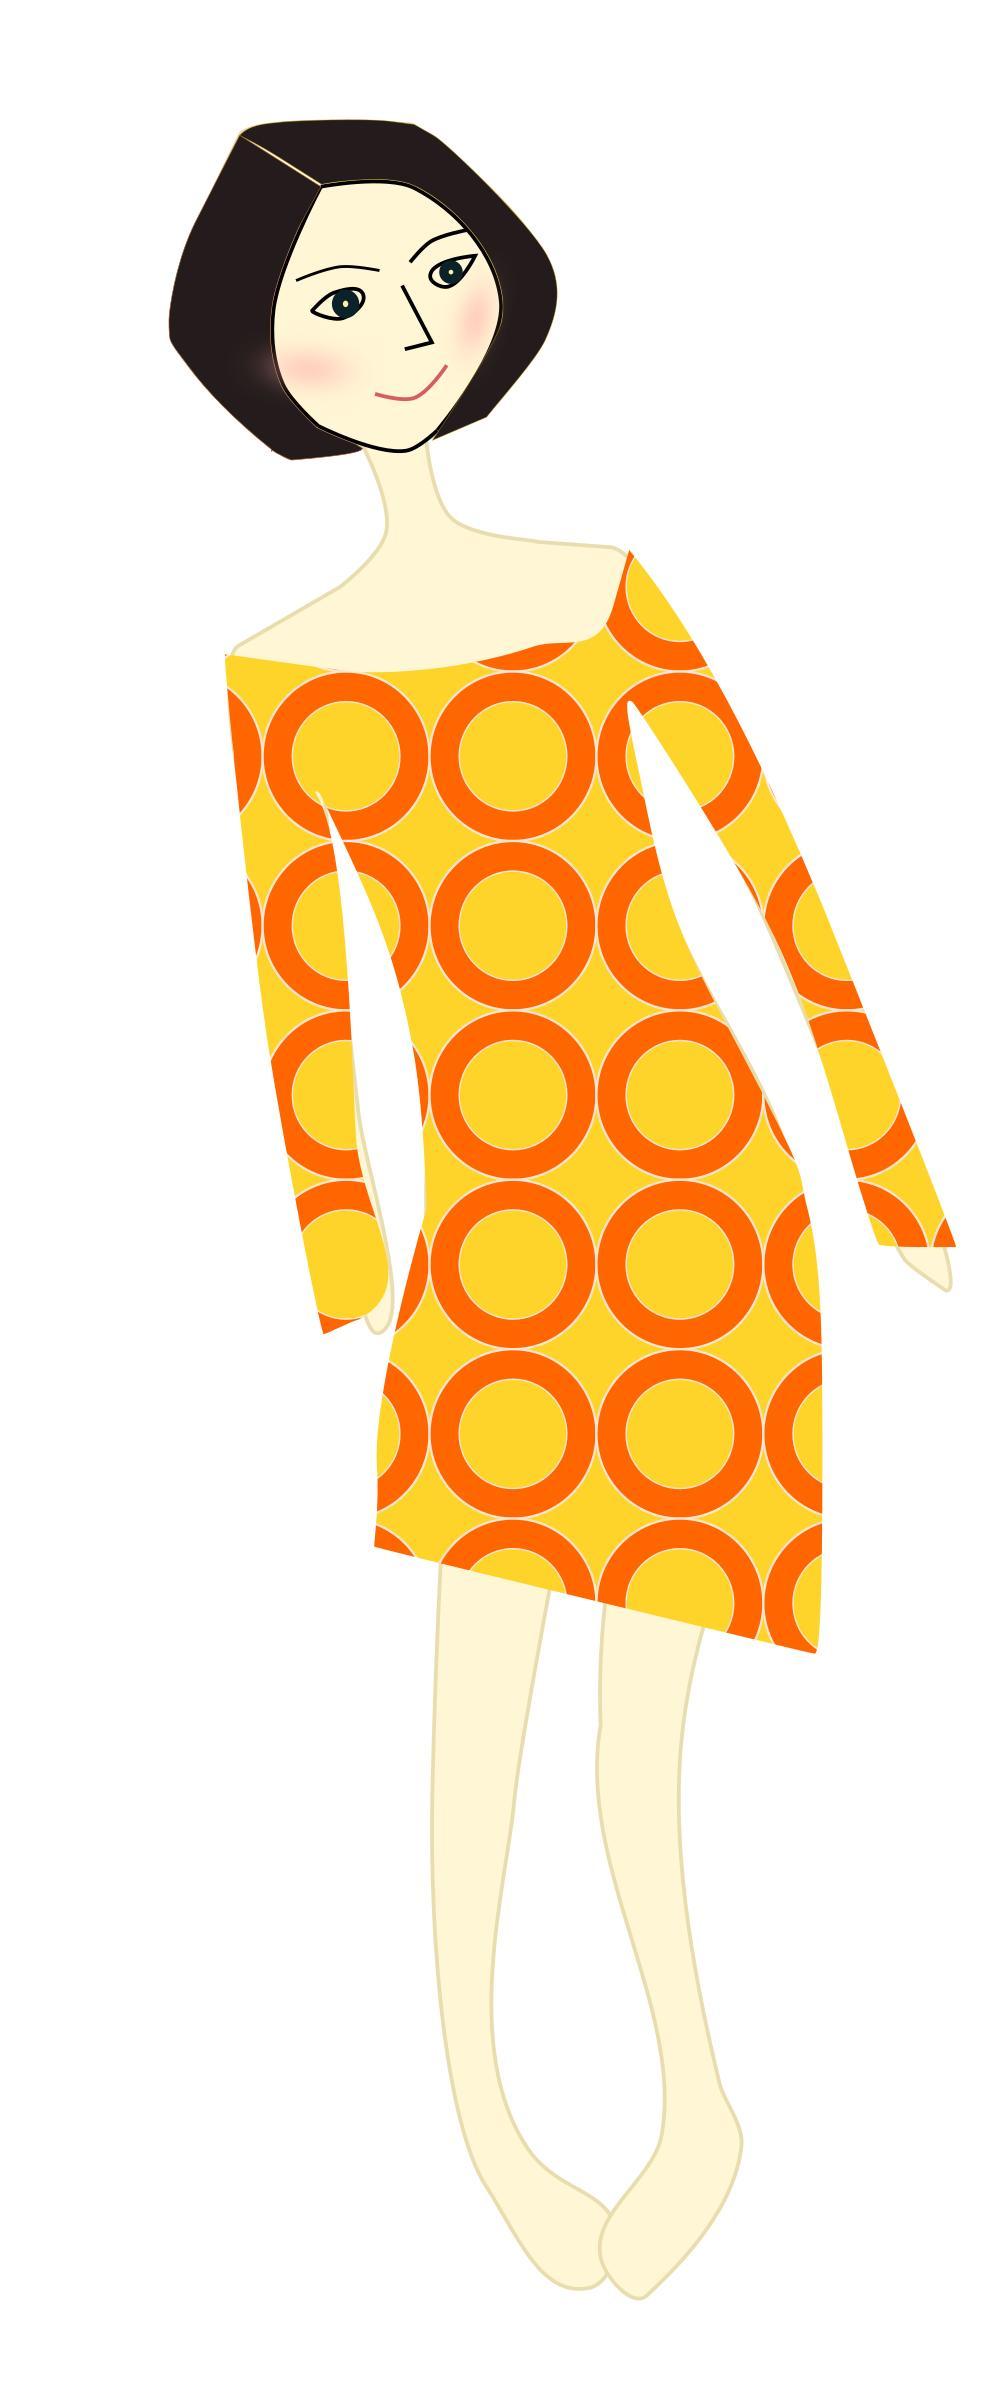 Girl in the dress png transparent